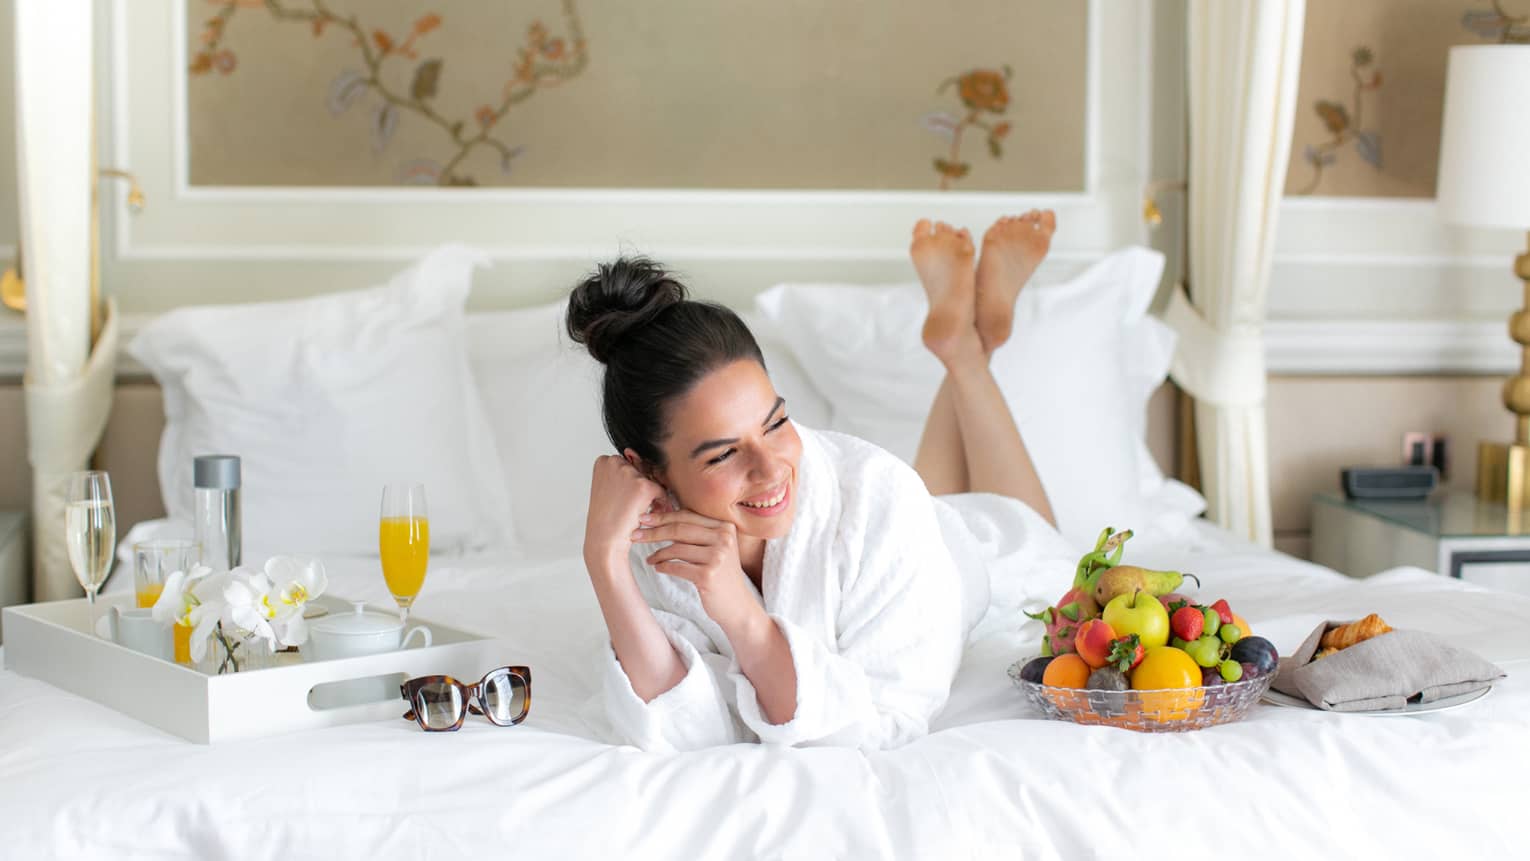 A woman in a spa robe laying on a bed with juice and fruit.